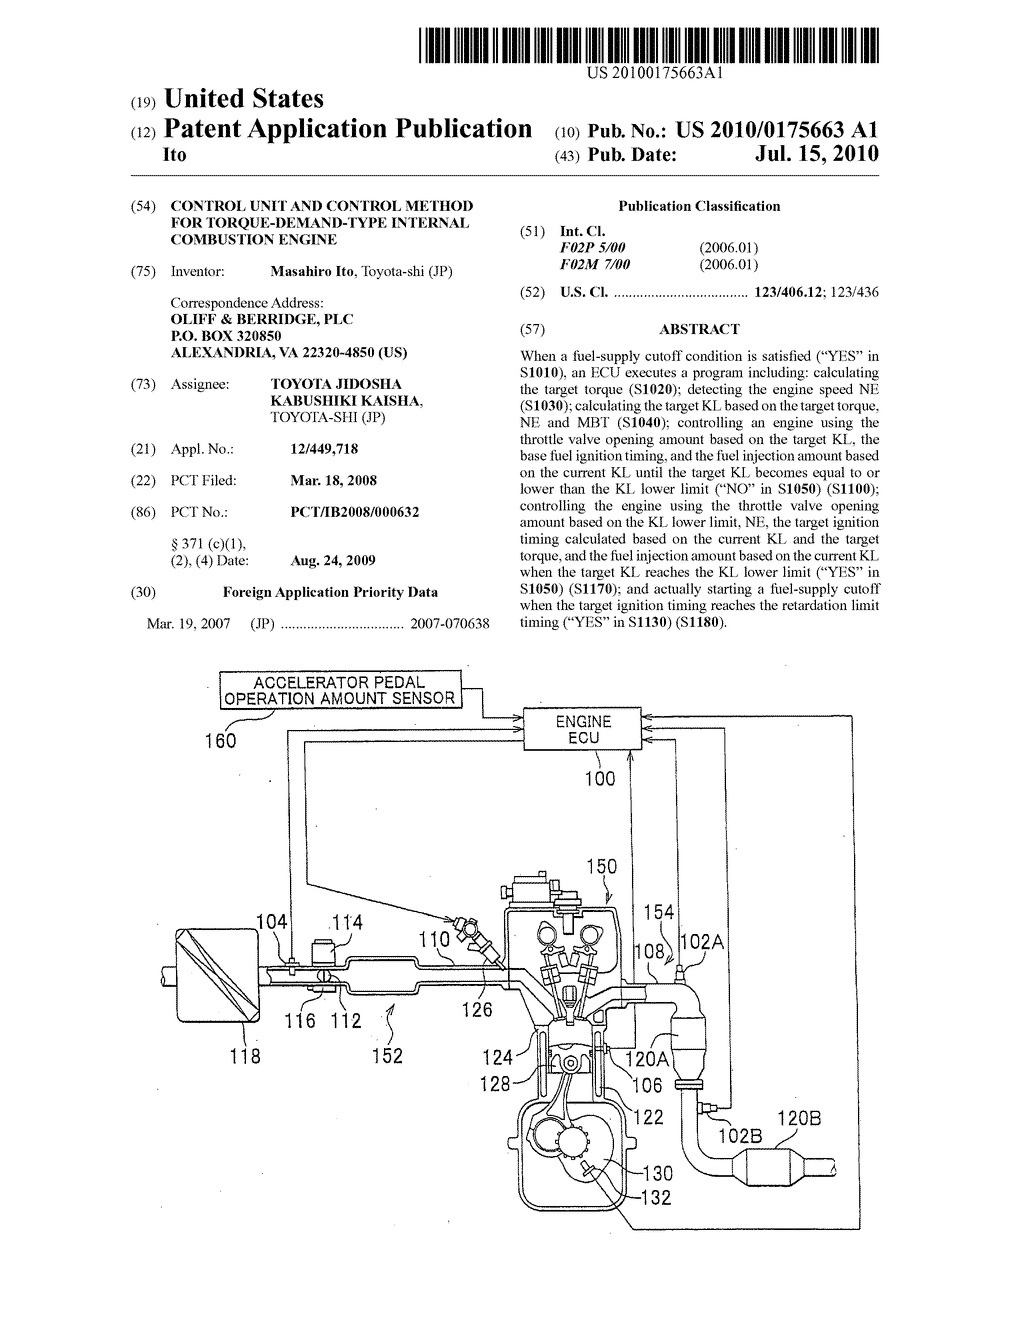 CONTROL UNIT AND CONTROL METHOD FOR TORQUE-DEMAND-TYPE INTERNAL COMBUSTION ENGINE - diagram, schematic, and image 01